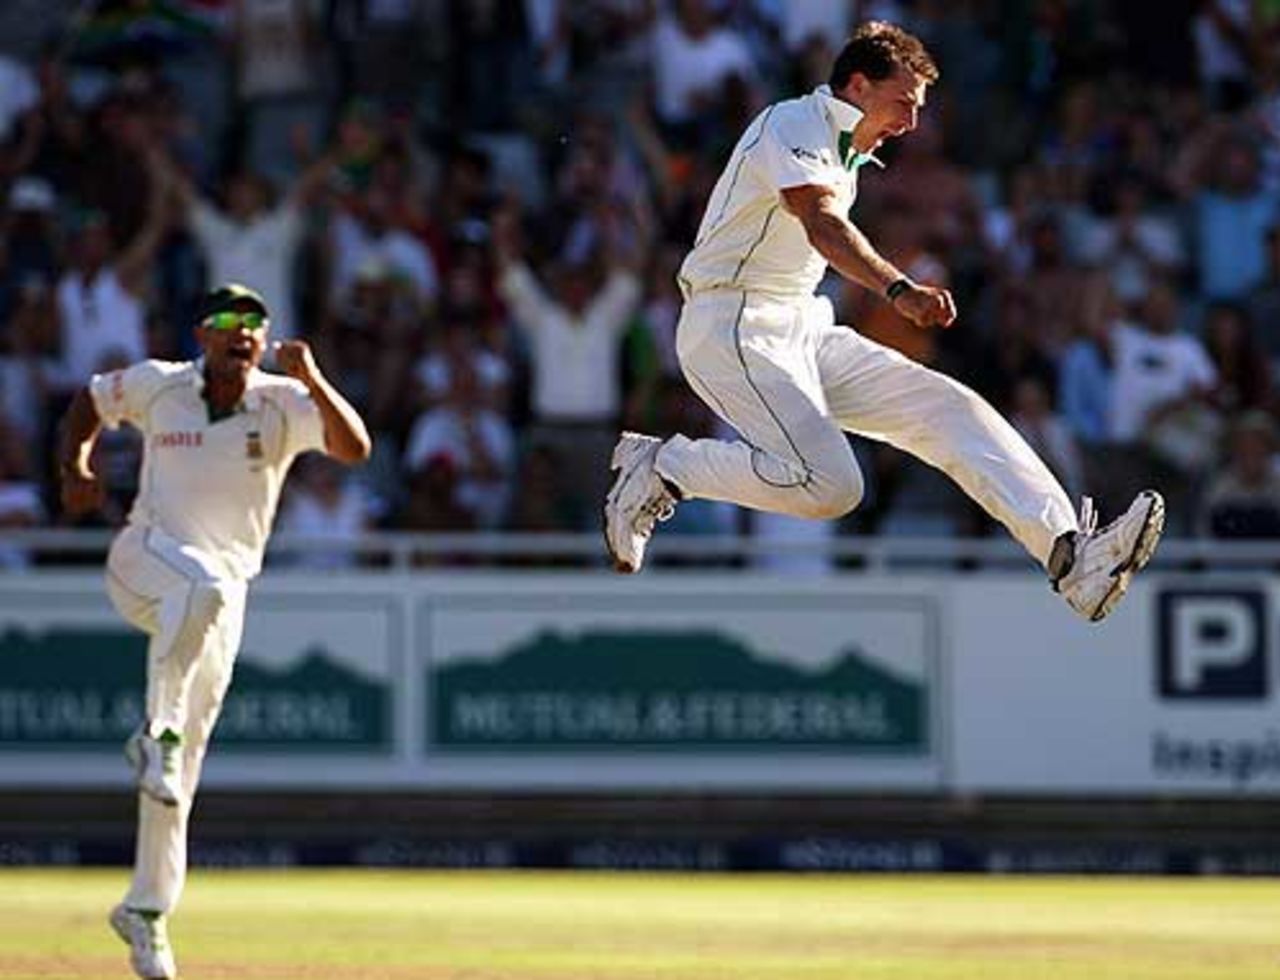 Dale Steyn can't control his emotions on dismissing Ricky Ponting, South Africa v Australia, 3rd Test, 3rd day, Cape Town, March 21, 2009